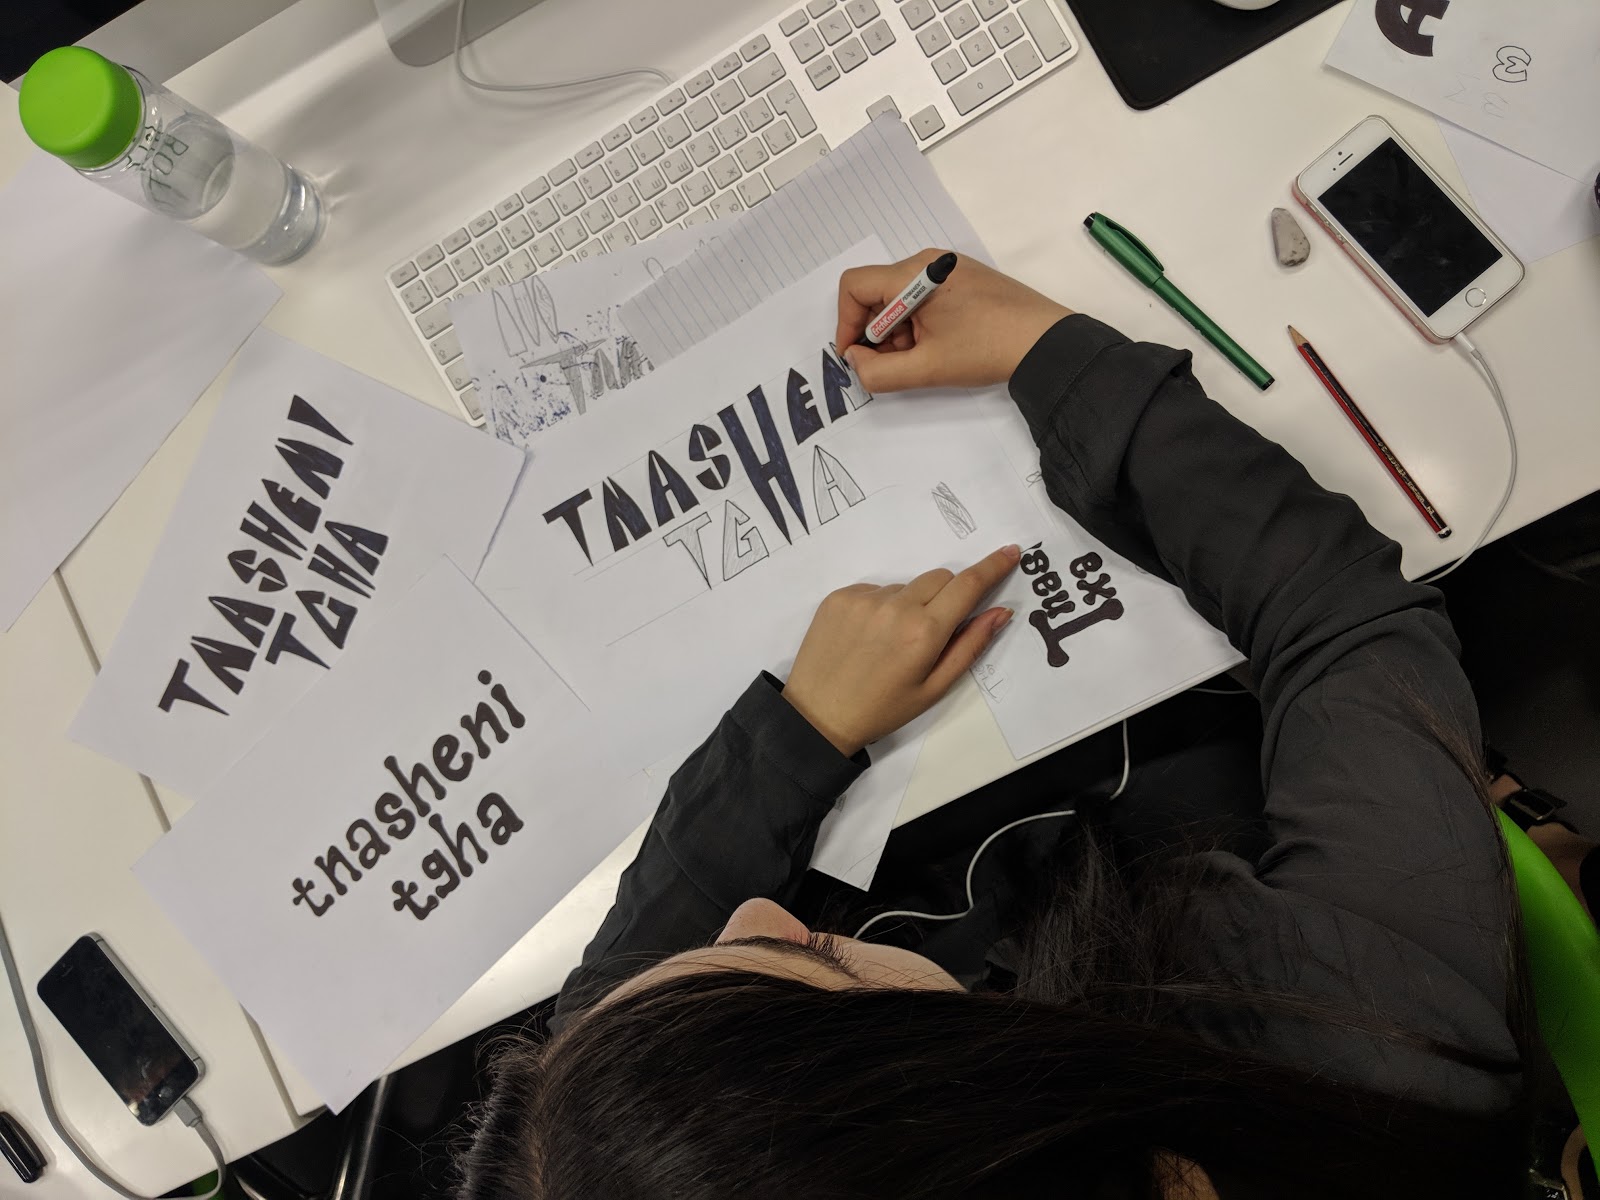 Overhead shot showing a female student working on some lettering with a magic marker.